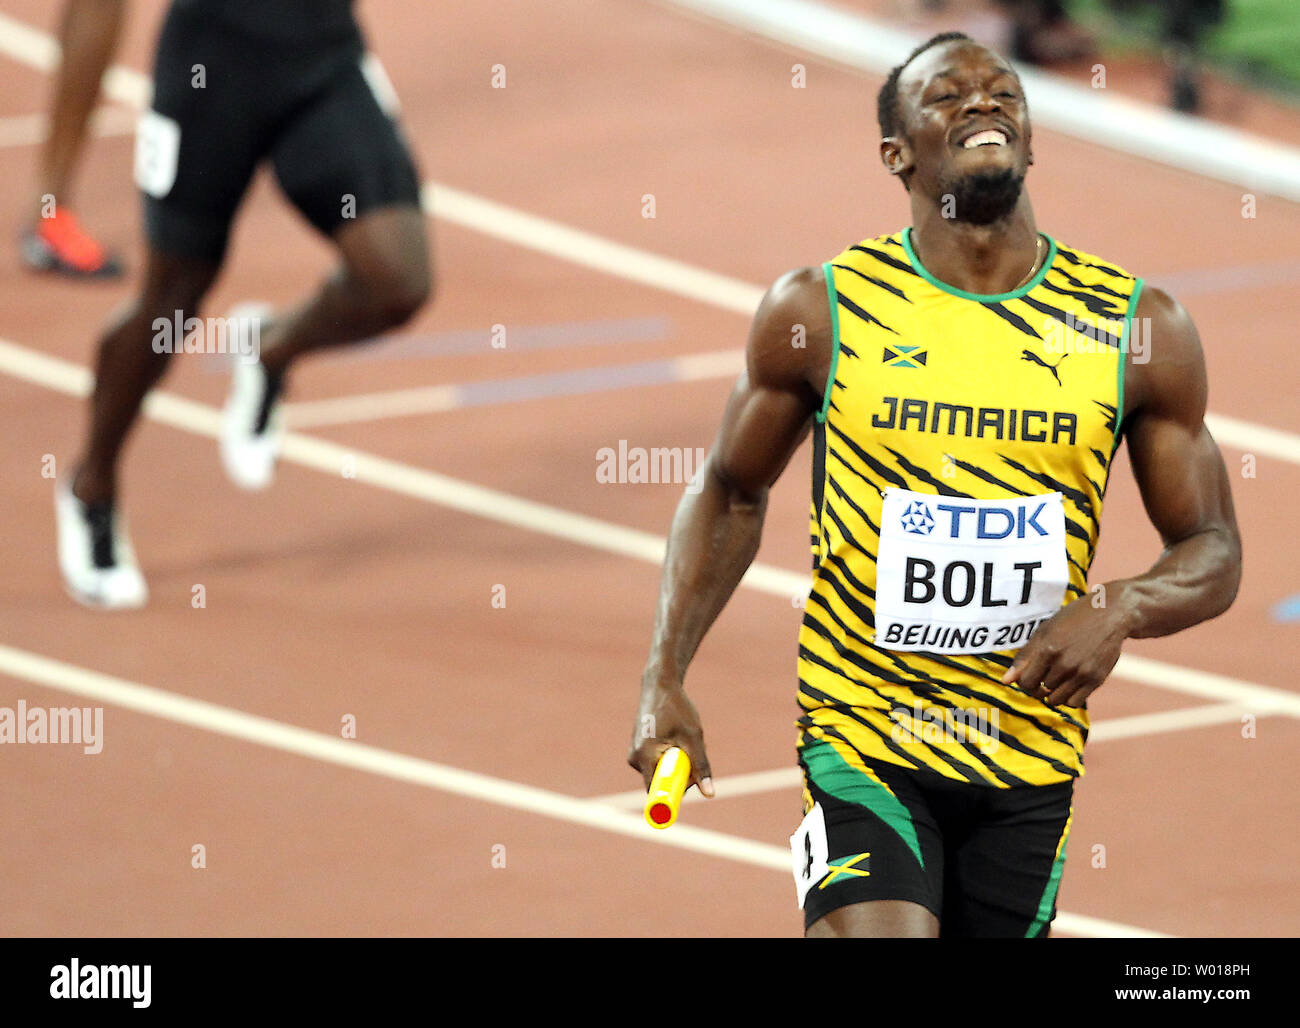 Jamaica takes first as Usain Bolt crosses the finish line in the 4x100 meters relay final at the IAAF World Championships being hosted by Beijing on August 29, 2015.  Jamaica won with a time of 37.36 seconds, followed by China (38.01) and Canada (38.13) in third.  USA was disqualified.   Photo by Stephen Shaver/UPI Stock Photo